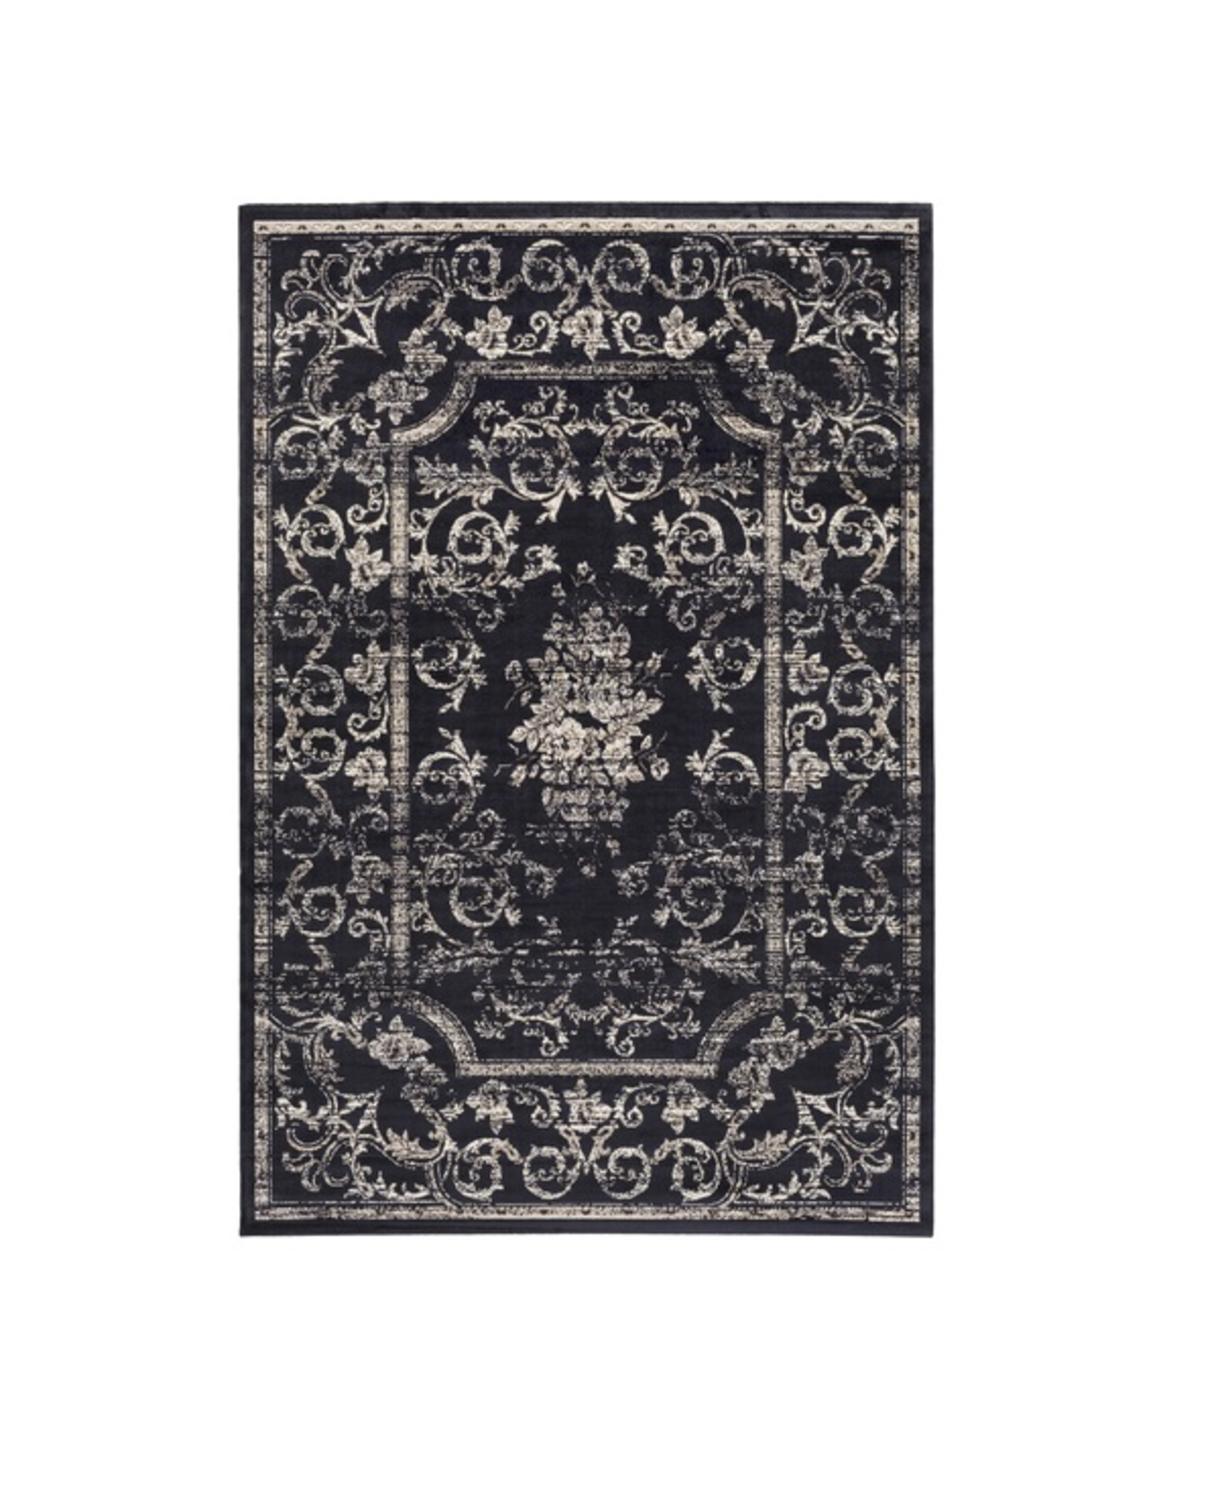 Diva At Home 7.65' x 11' Palladian Royale Indigo Night Blue, Taupe Gray and Cotton White Area Throw Rug